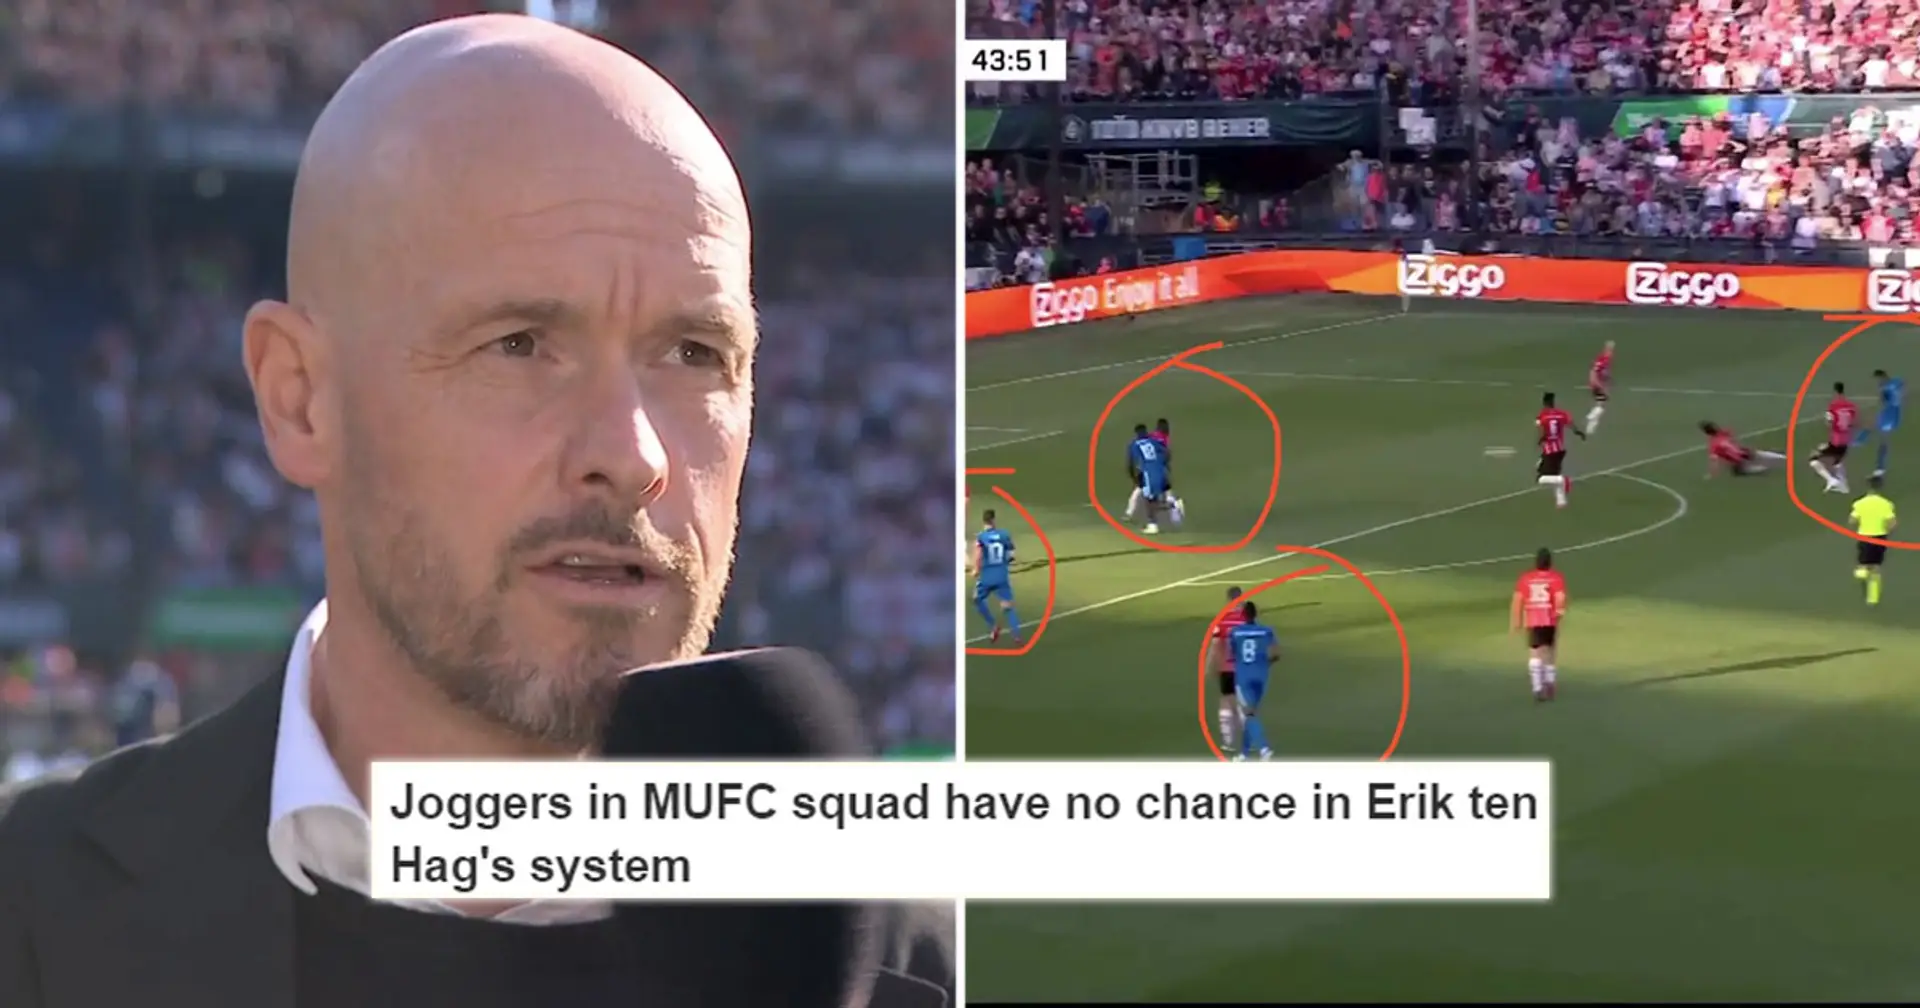 United fan says 'joggers in United squad' have no chance under Ten Hag - explains why with 3 pictures